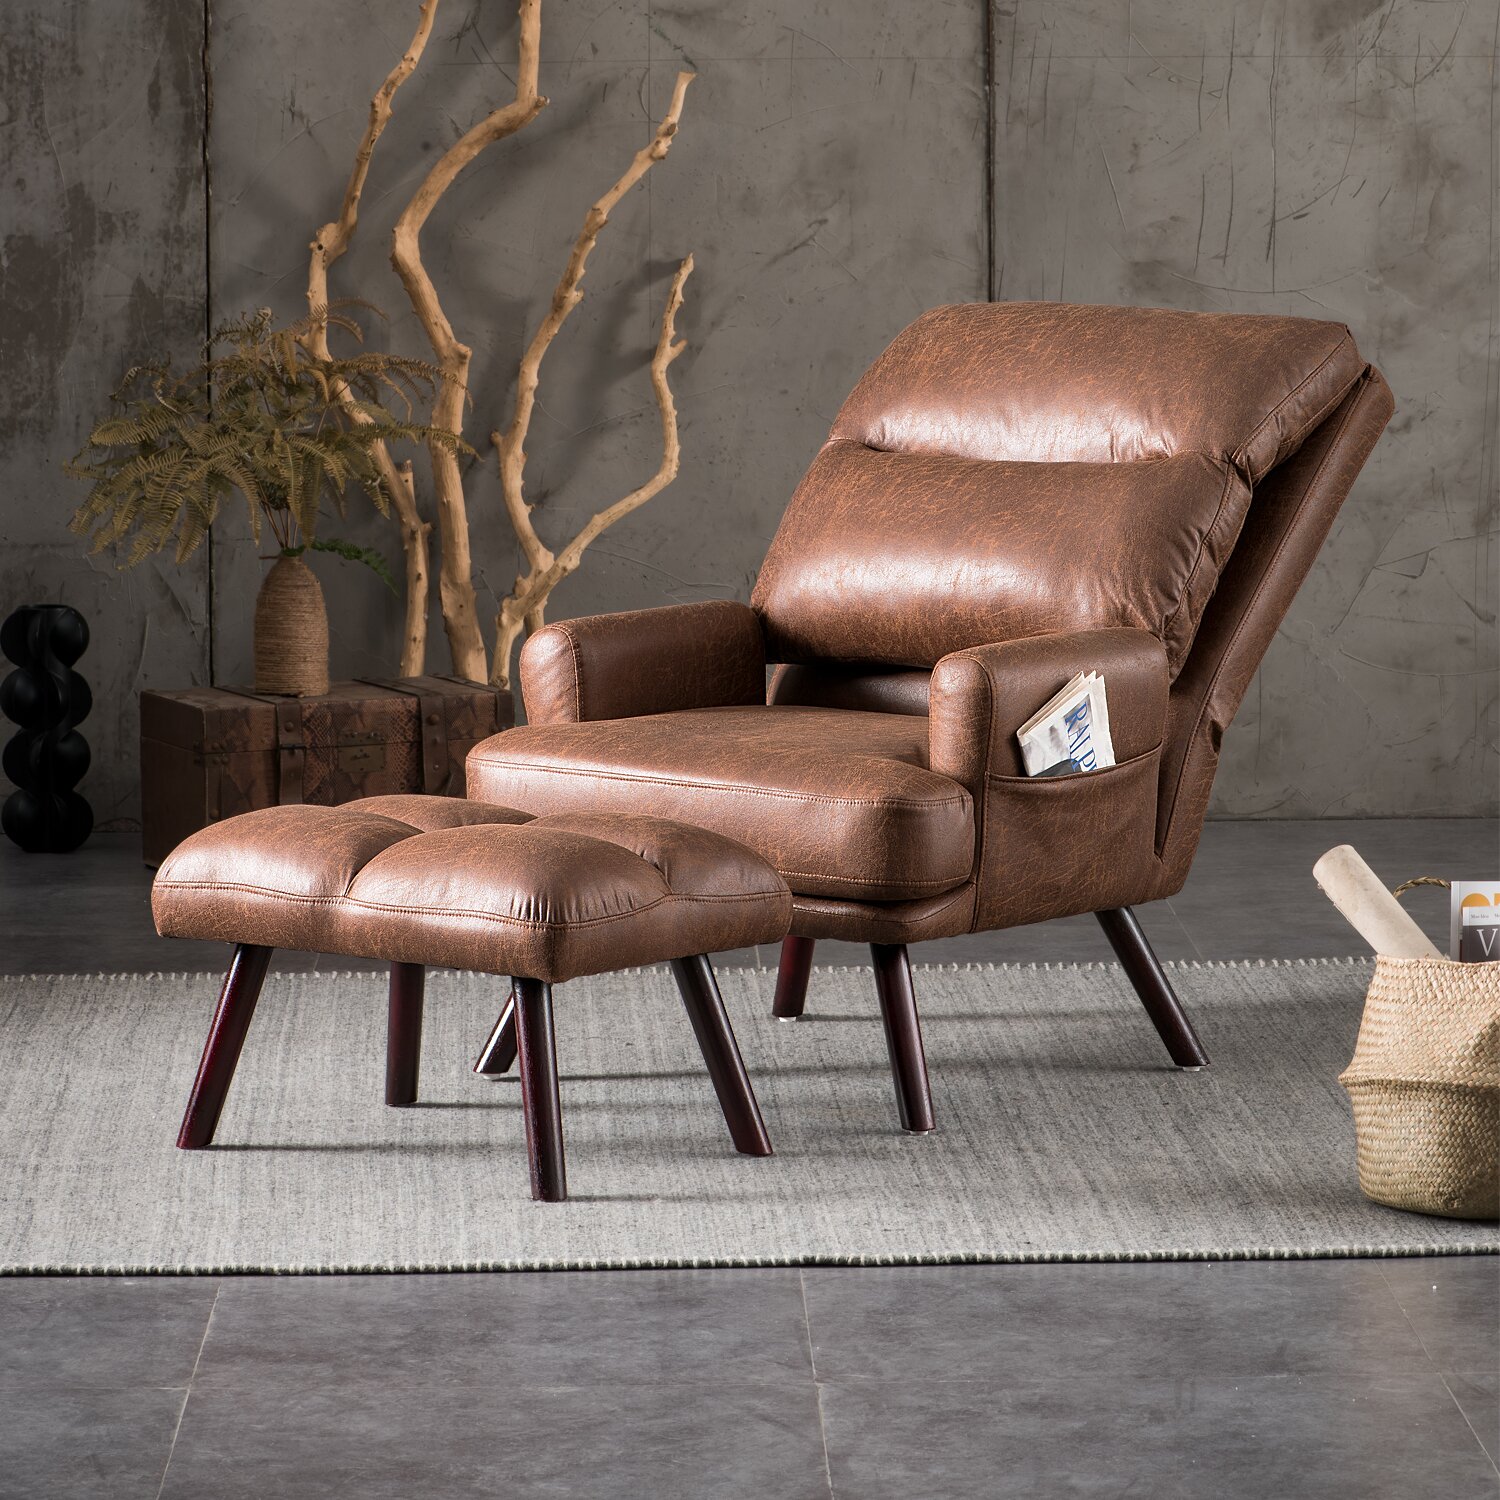 Leather Recliner Chair With Ottoman, Leather Reclining Chair Ottoman